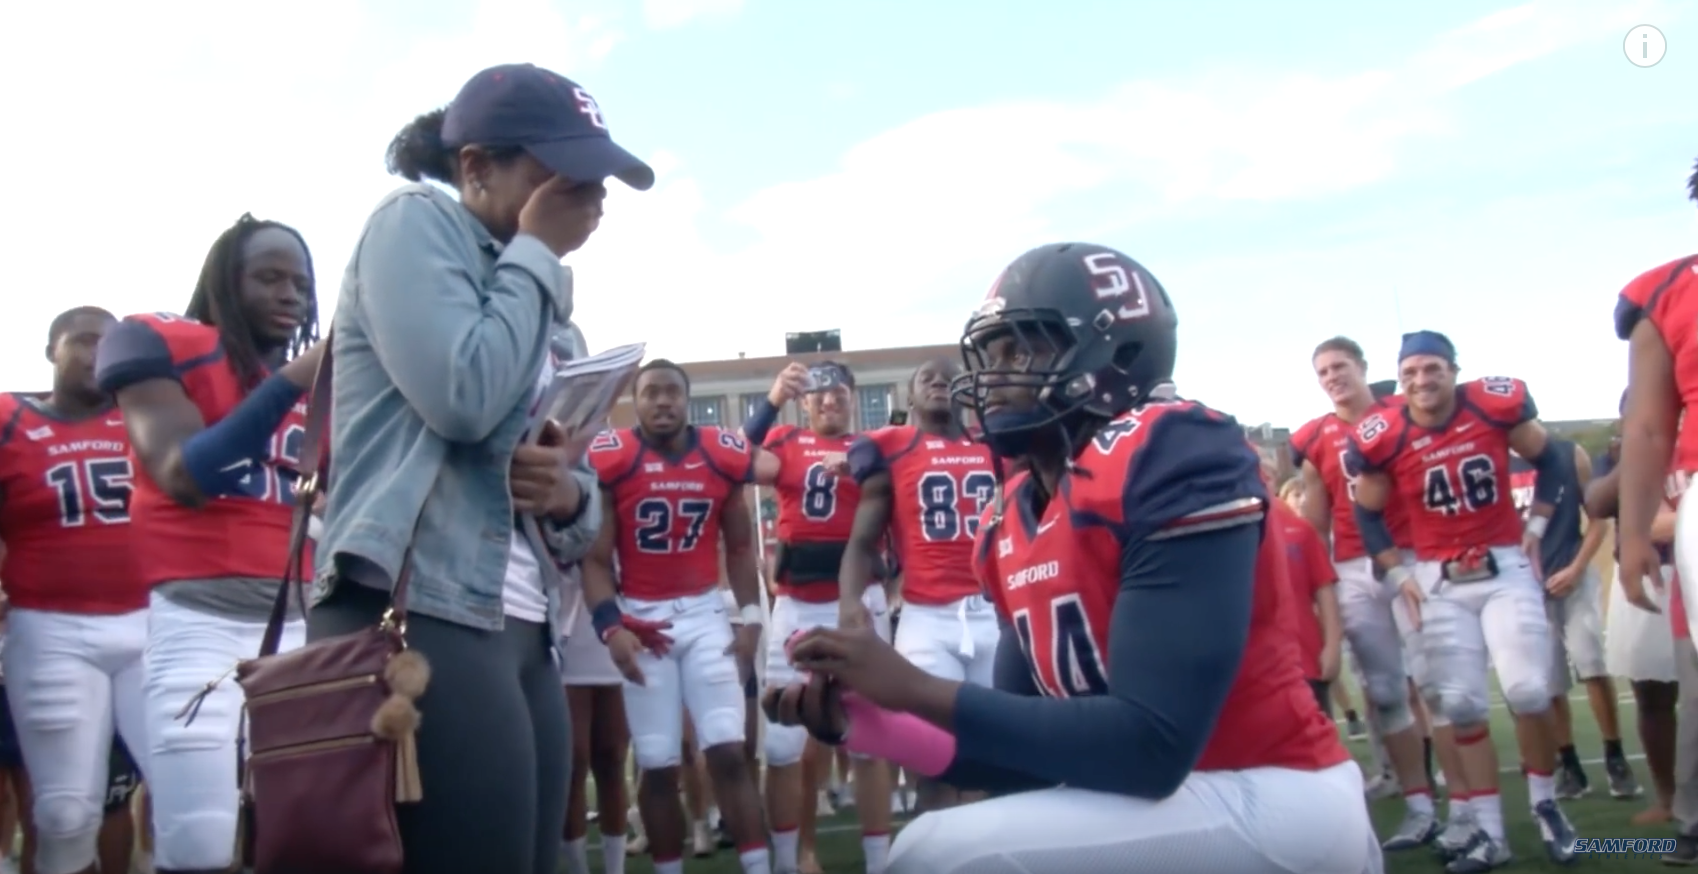 Samford University Football Player Proposed To College Sweetheart With Help From His Team (And It's So Cute!)
